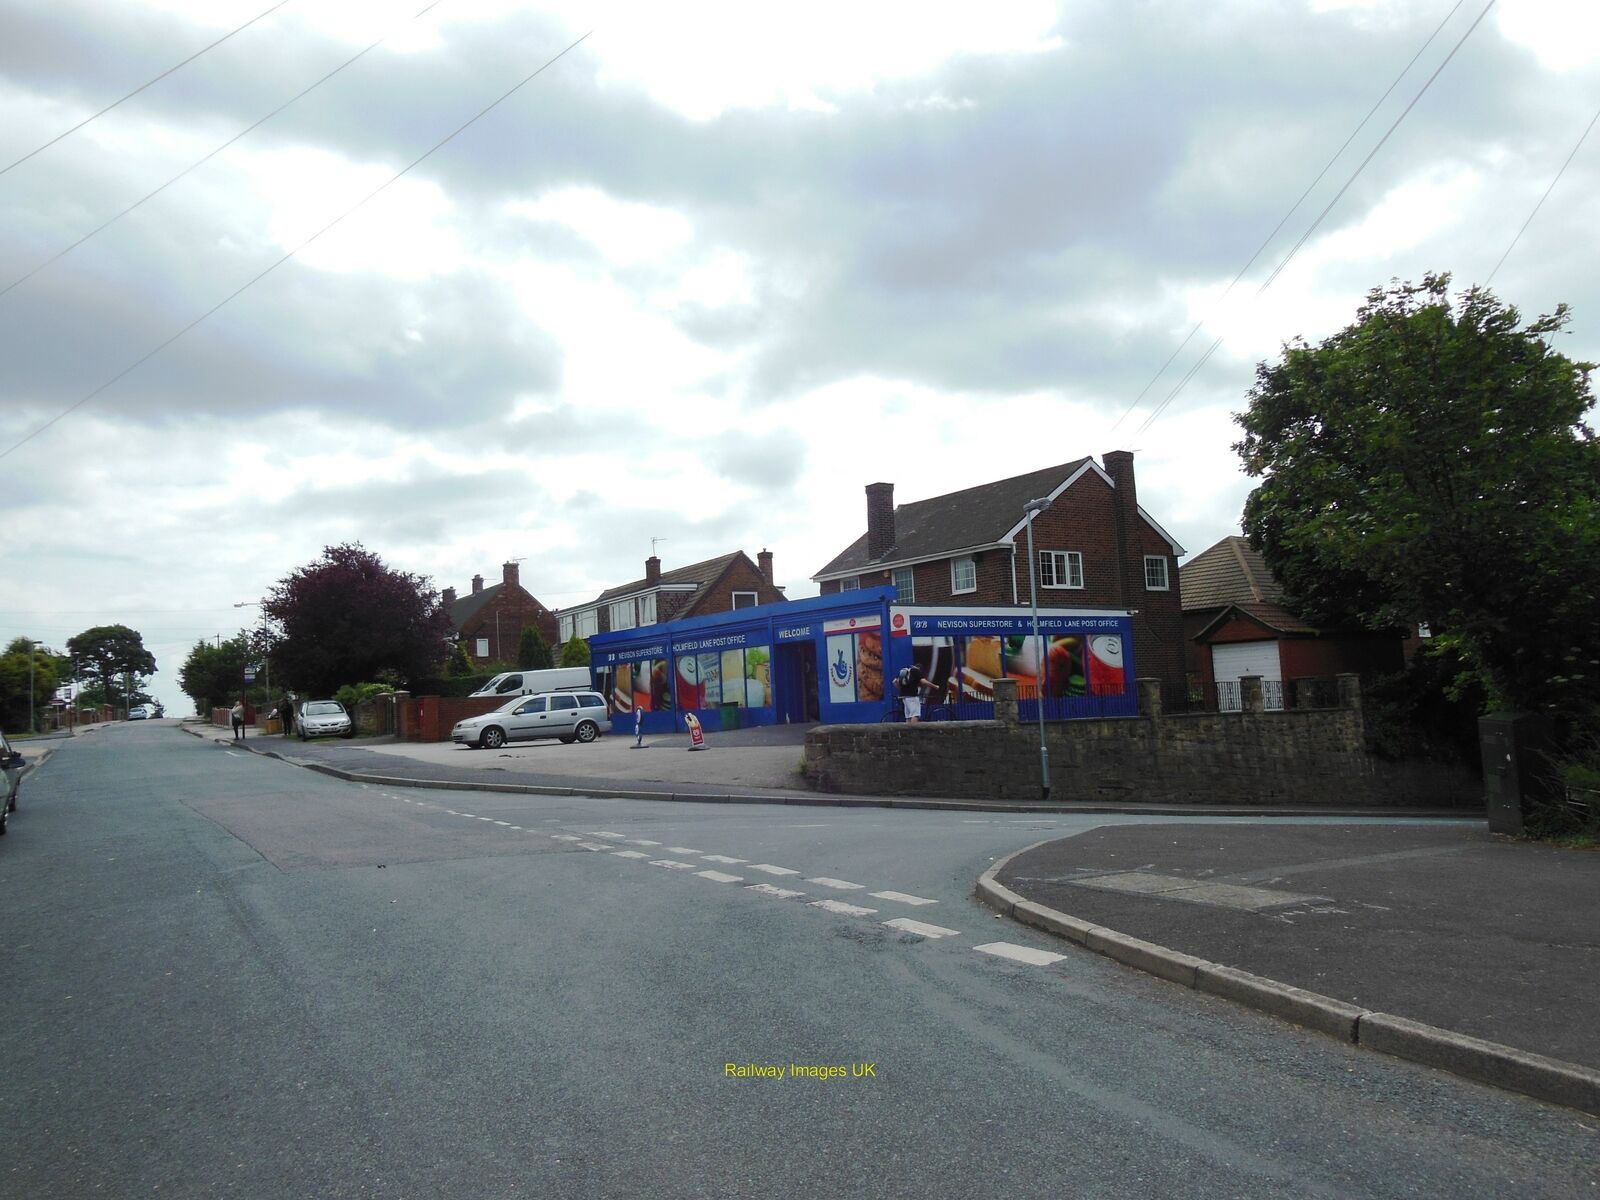 Photo 12x8 (A4) The Post Office and General Store Orchardhead Lane c2013